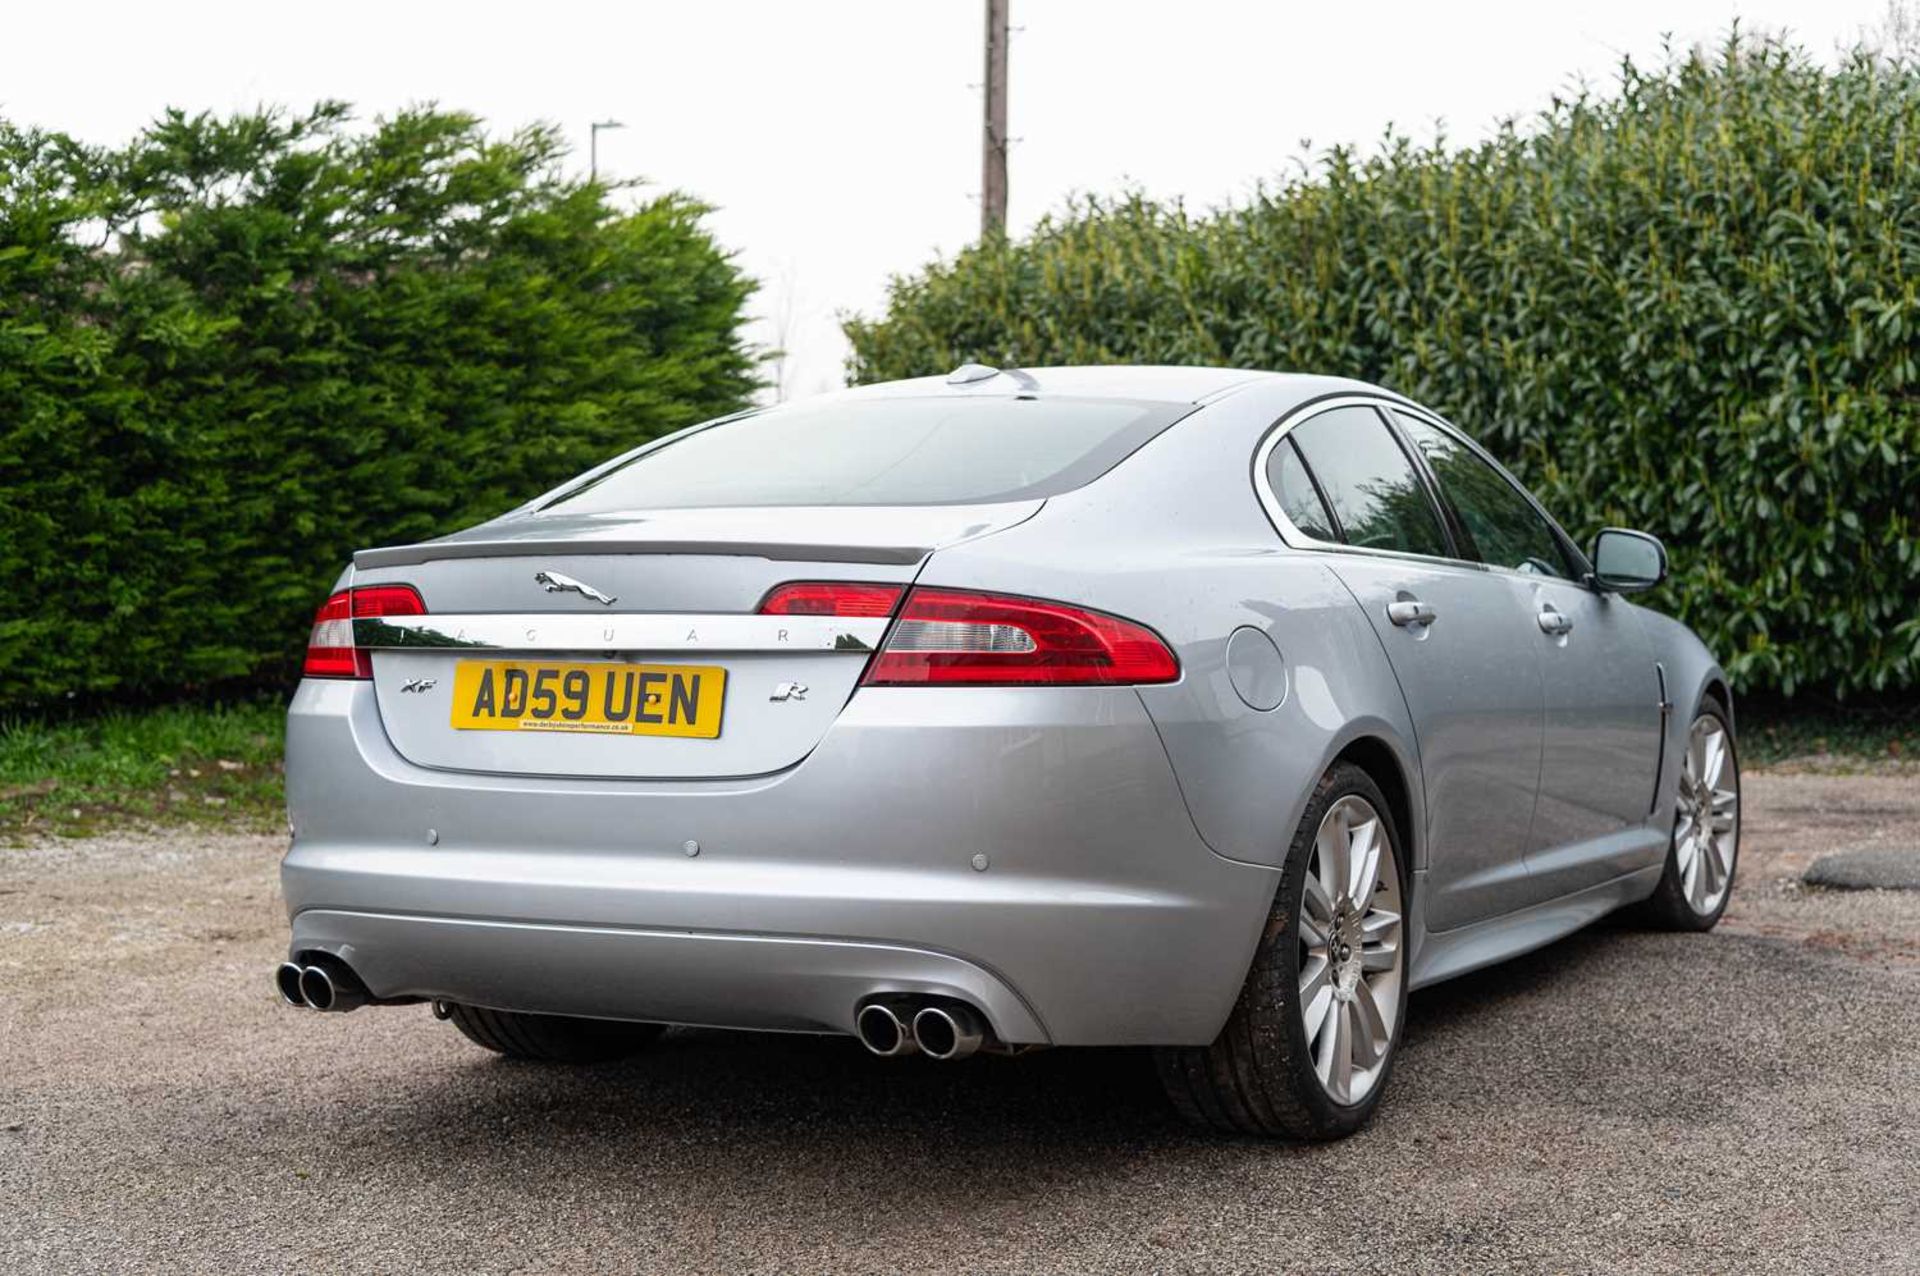 2009 Jaguar XFR Saloon 500 horsepower four-door super saloon, with full service history - Image 14 of 81